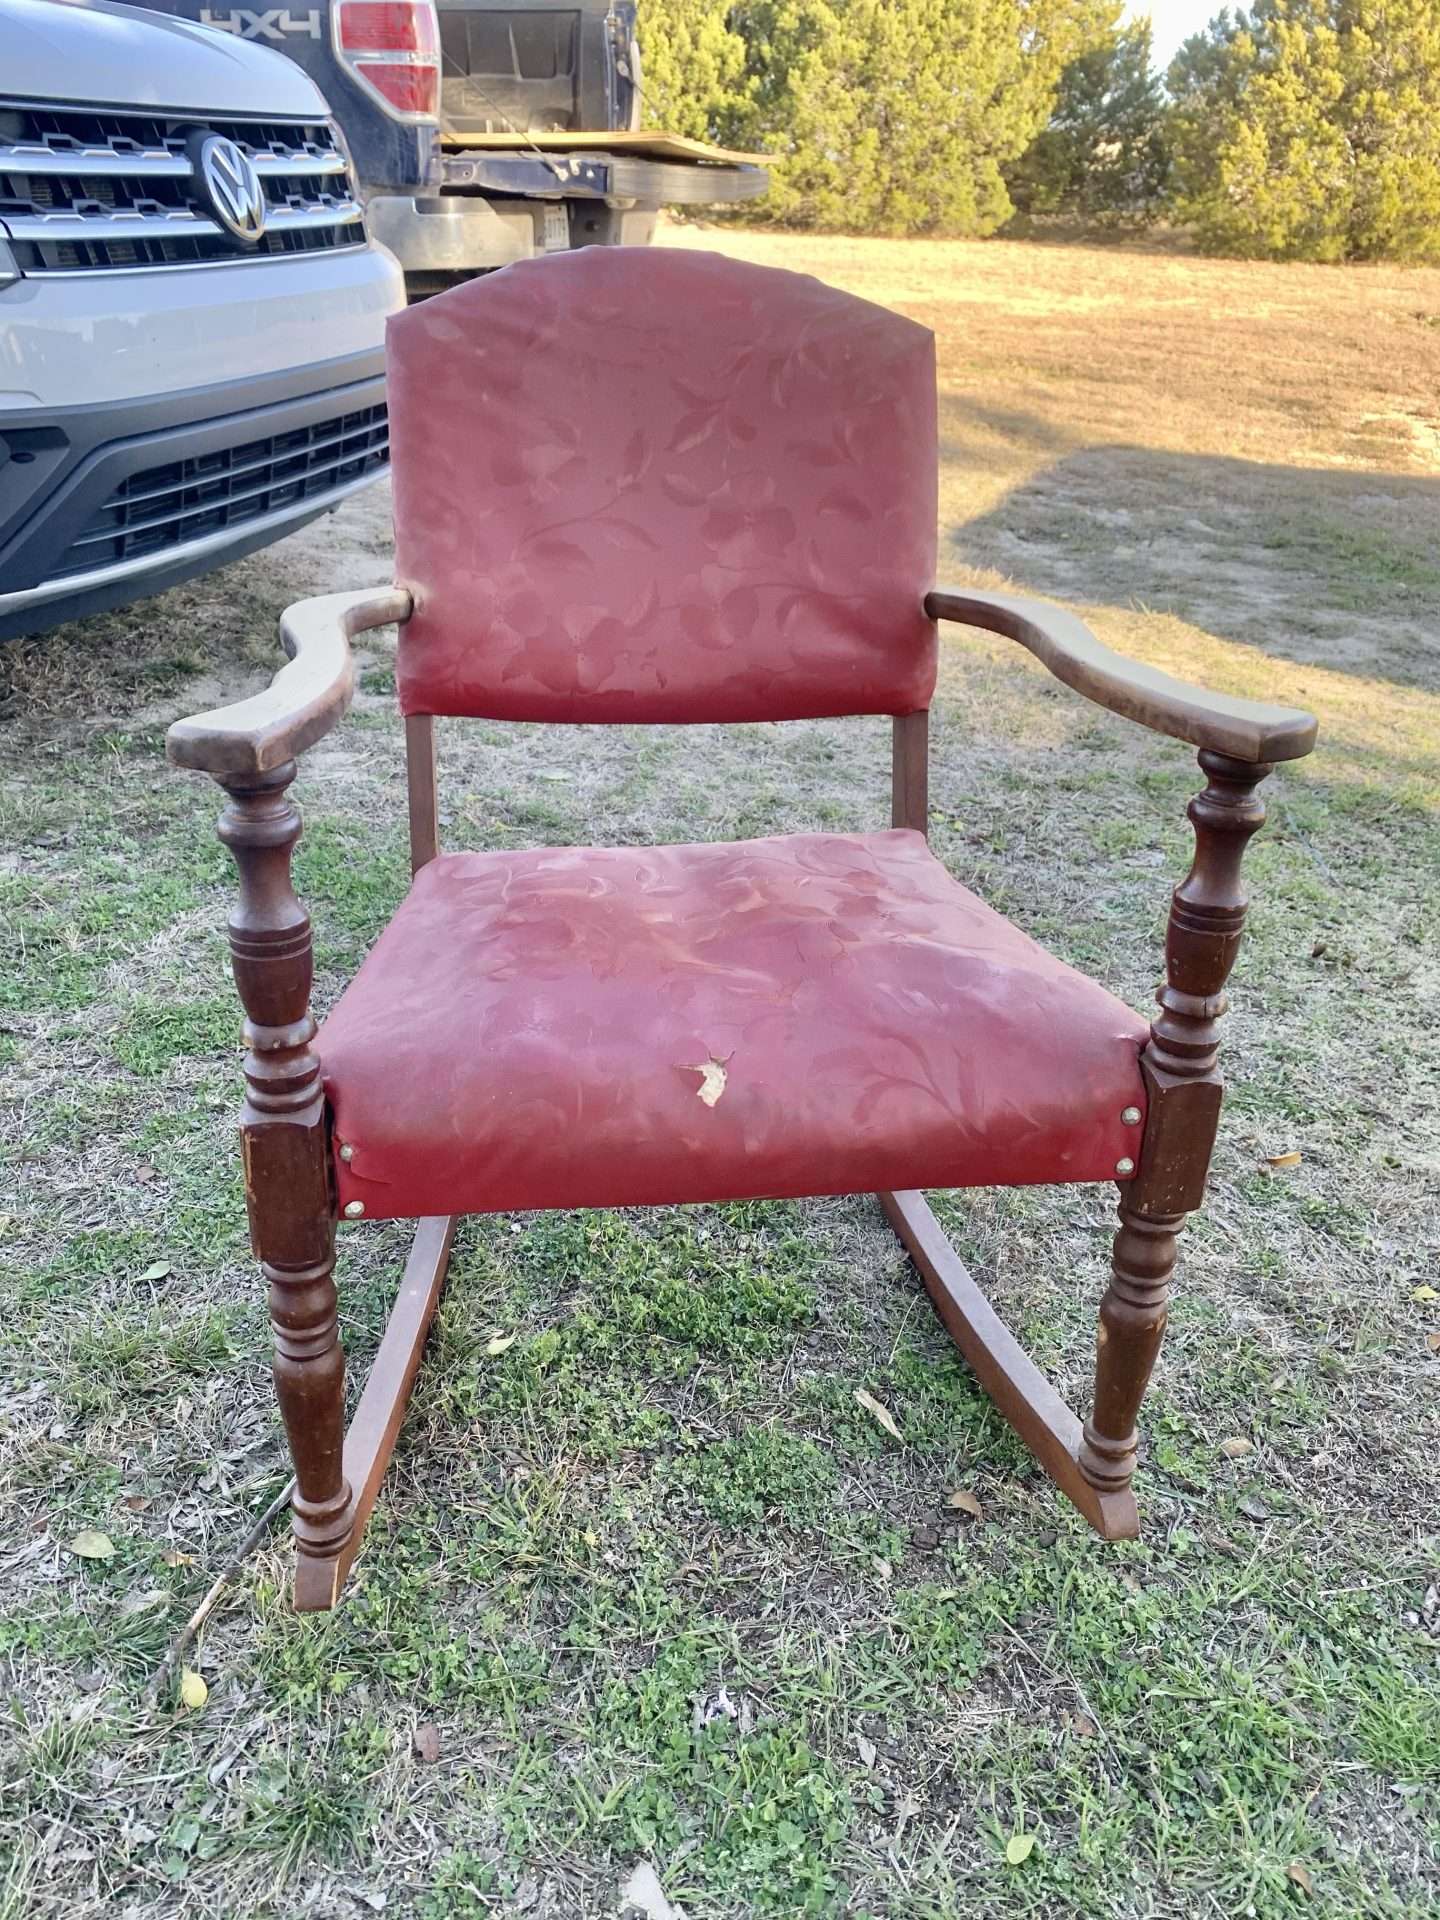 How to refurbish an old rocking chair.